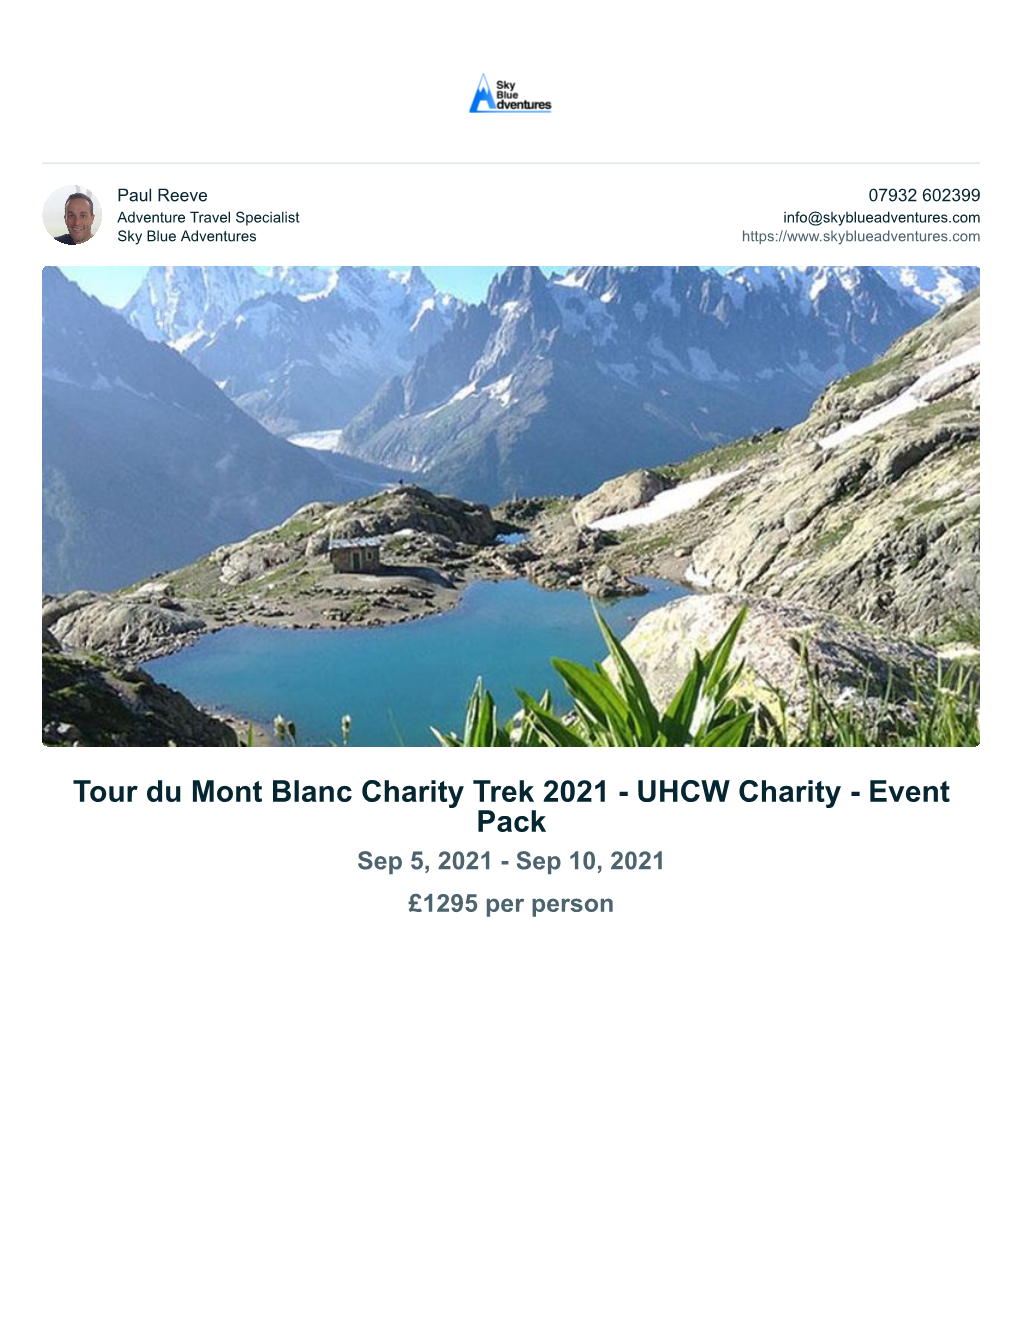 Tour Du Mont Blanc Charity Trek 2021 - UHCW Charity - Event Pack Sep 5, 2021 - Sep 10, 2021 £1295 Per Person Page 2 of 12 Trip Summary